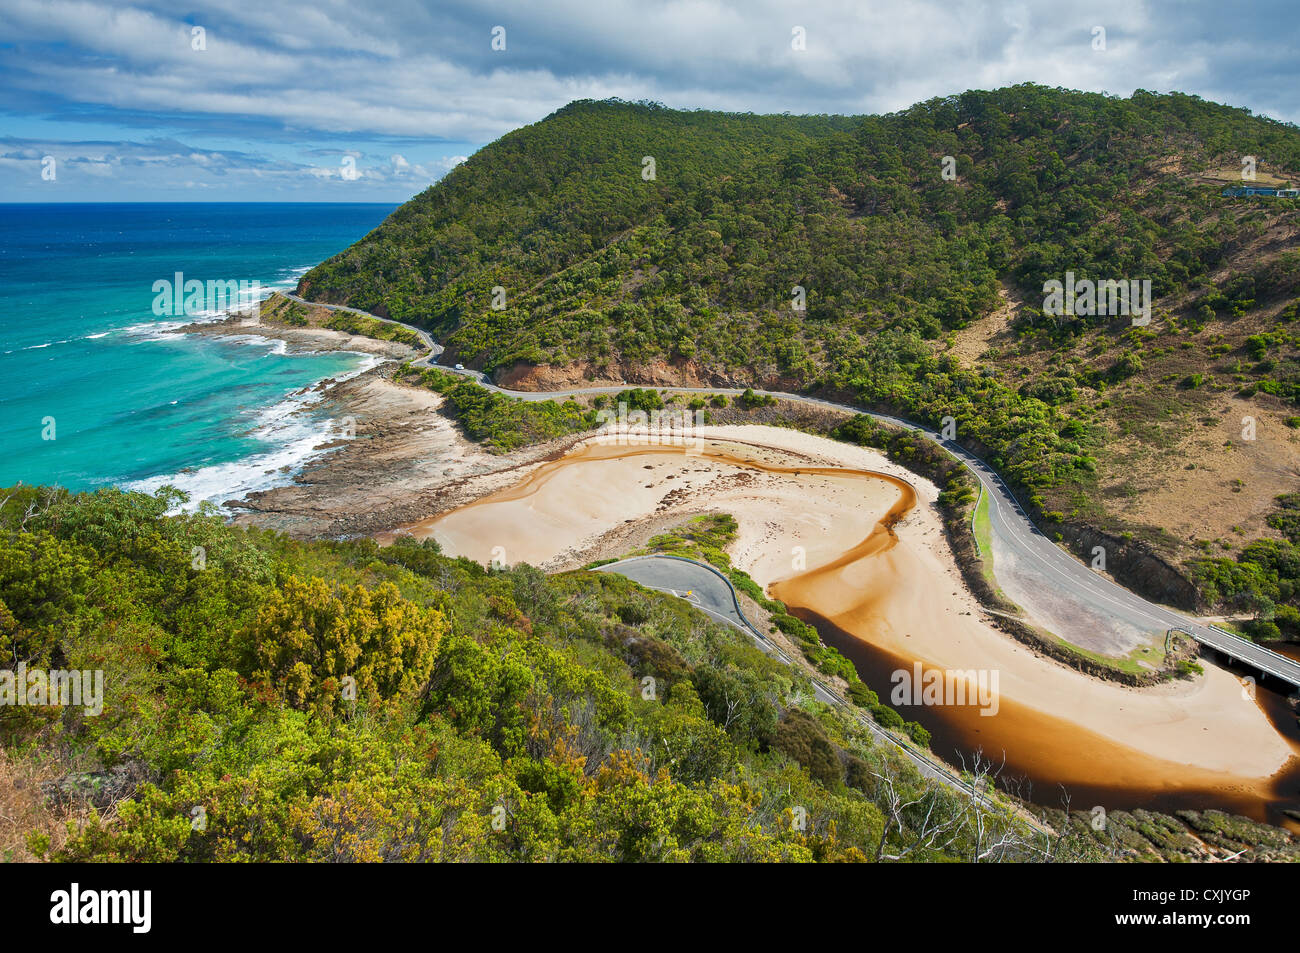 The Great Ocean Road winding its way along the coastline. Stock Photo